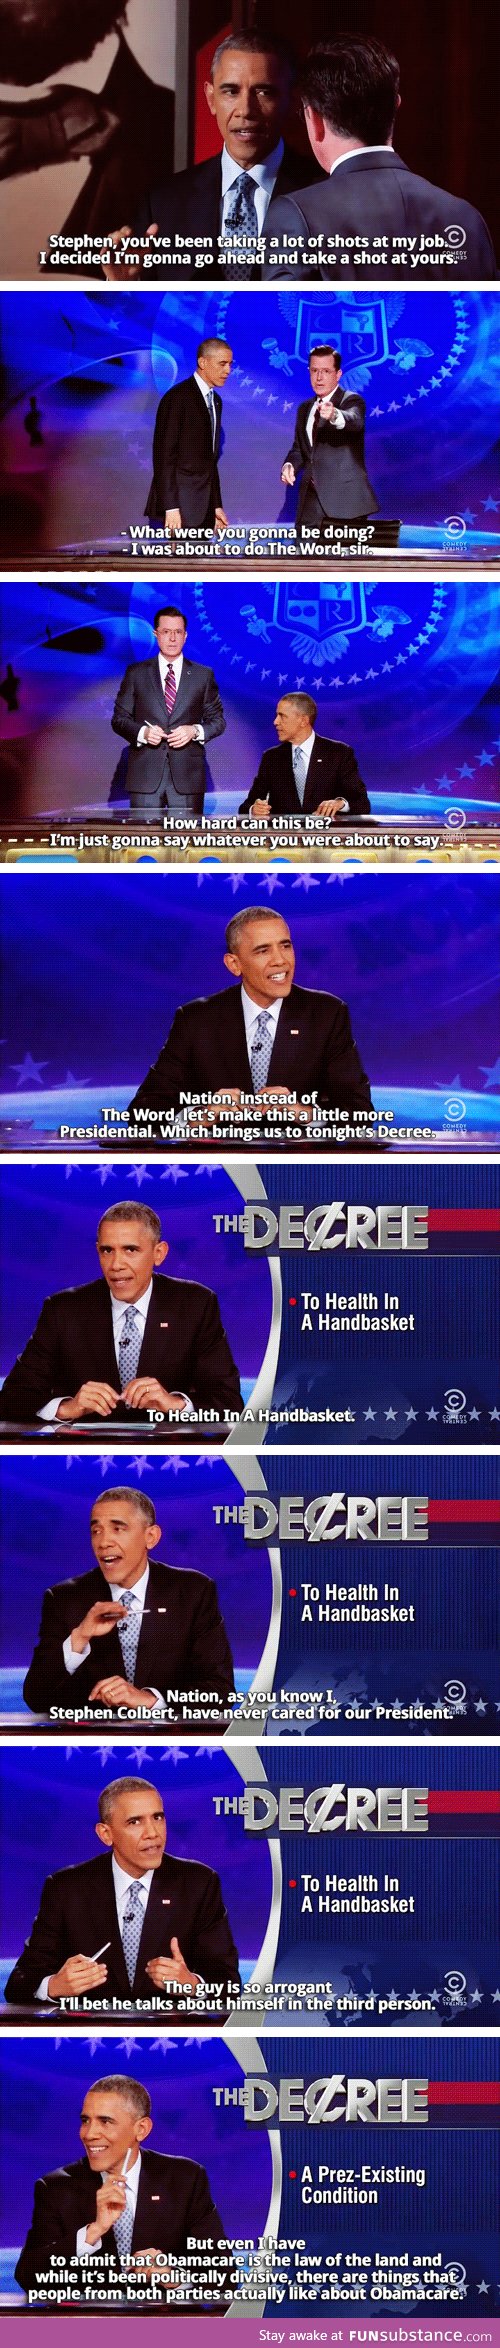 Barack Obama takes over The Word on The Colbert Report